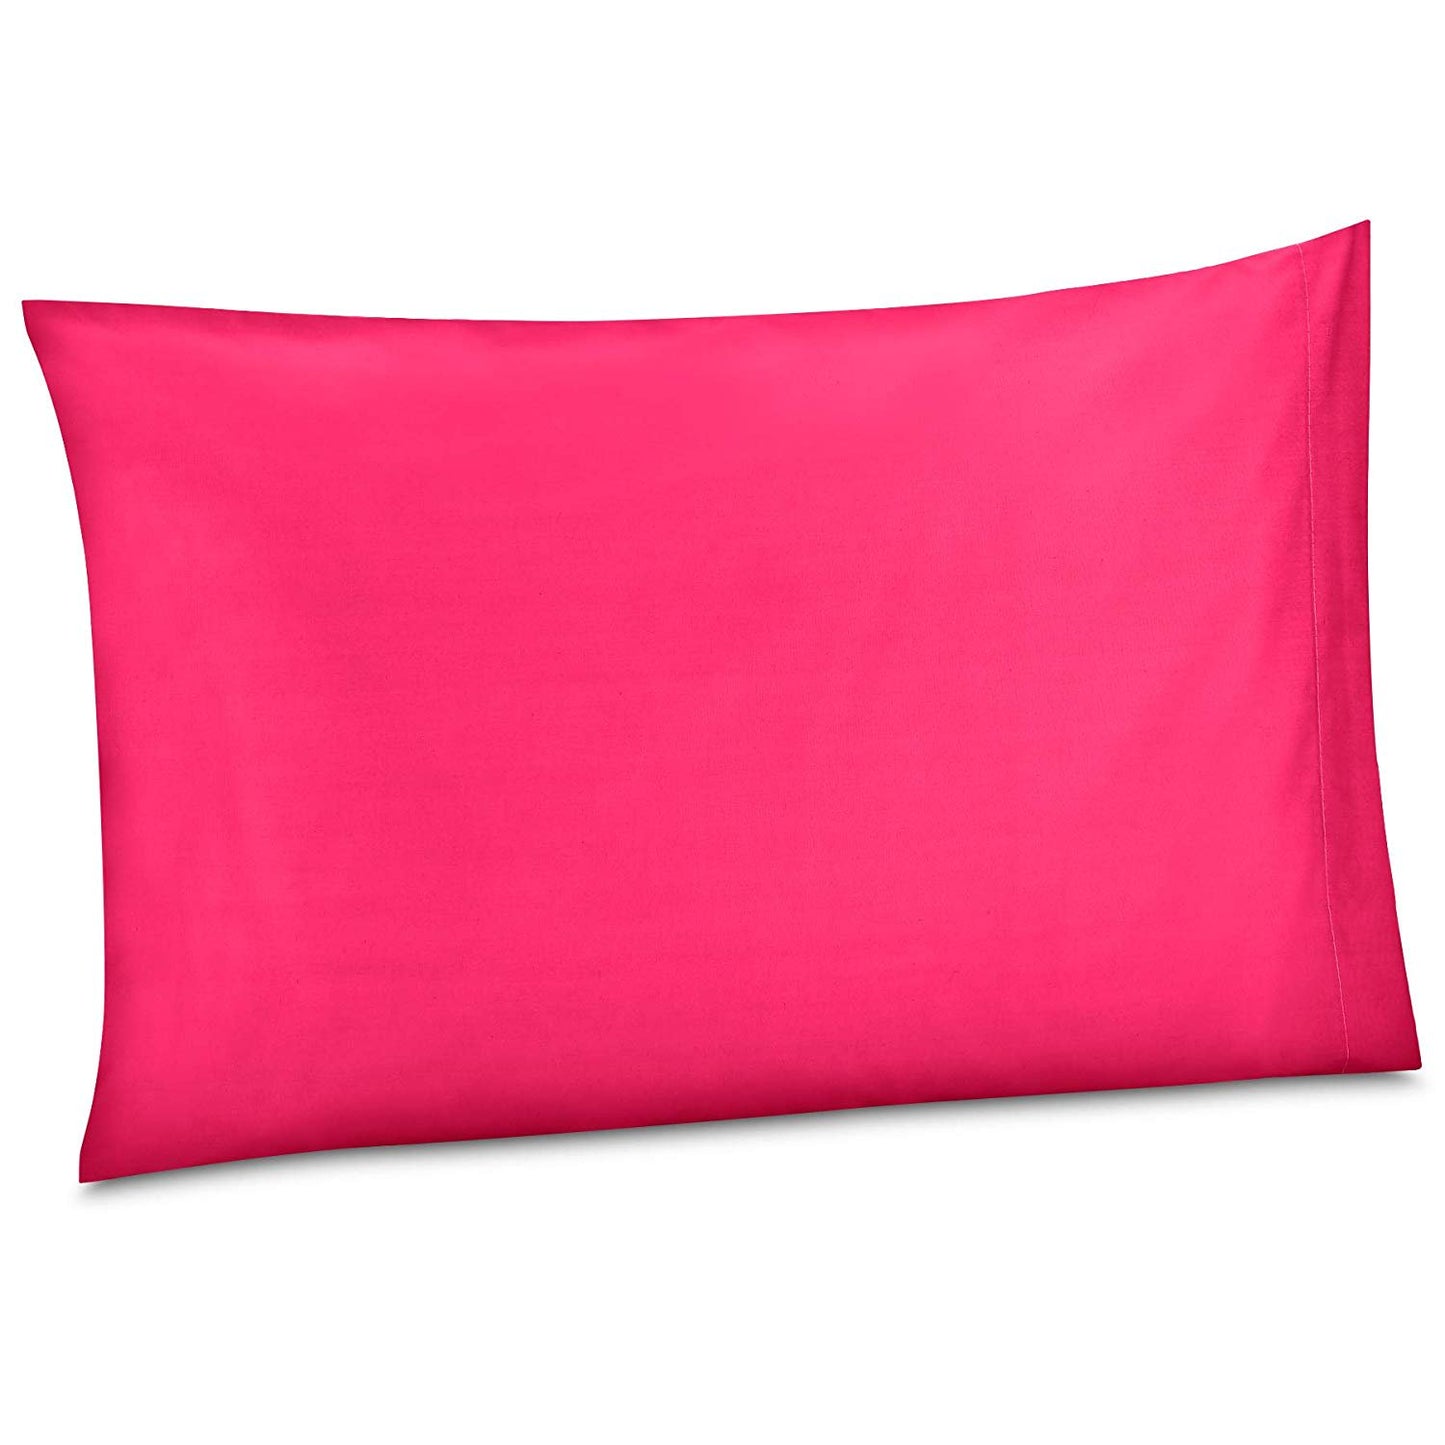 100% Cotton/Percale 210 Thread Count Pillow Cases Set of 2 Soft Hot Pink Cotton Pillow Cover for Sleeping-Bedroom Pillowcases